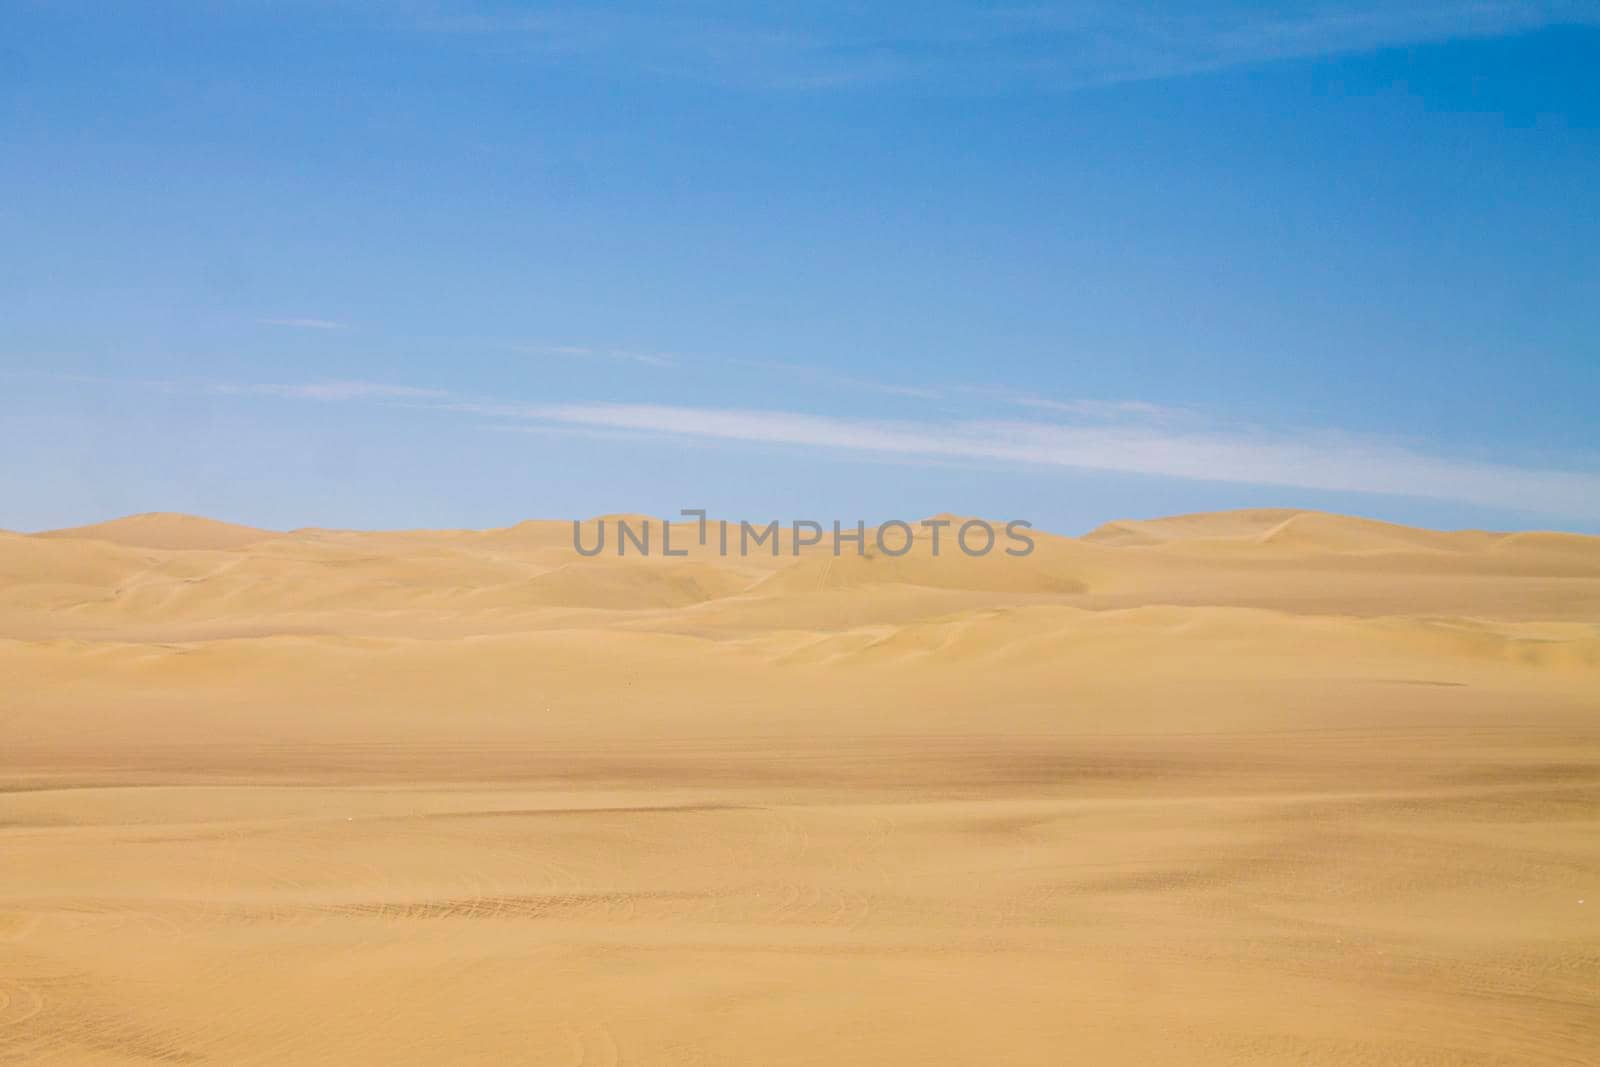 View of the dunes of Ica under the blue sky of Peru by eagg13